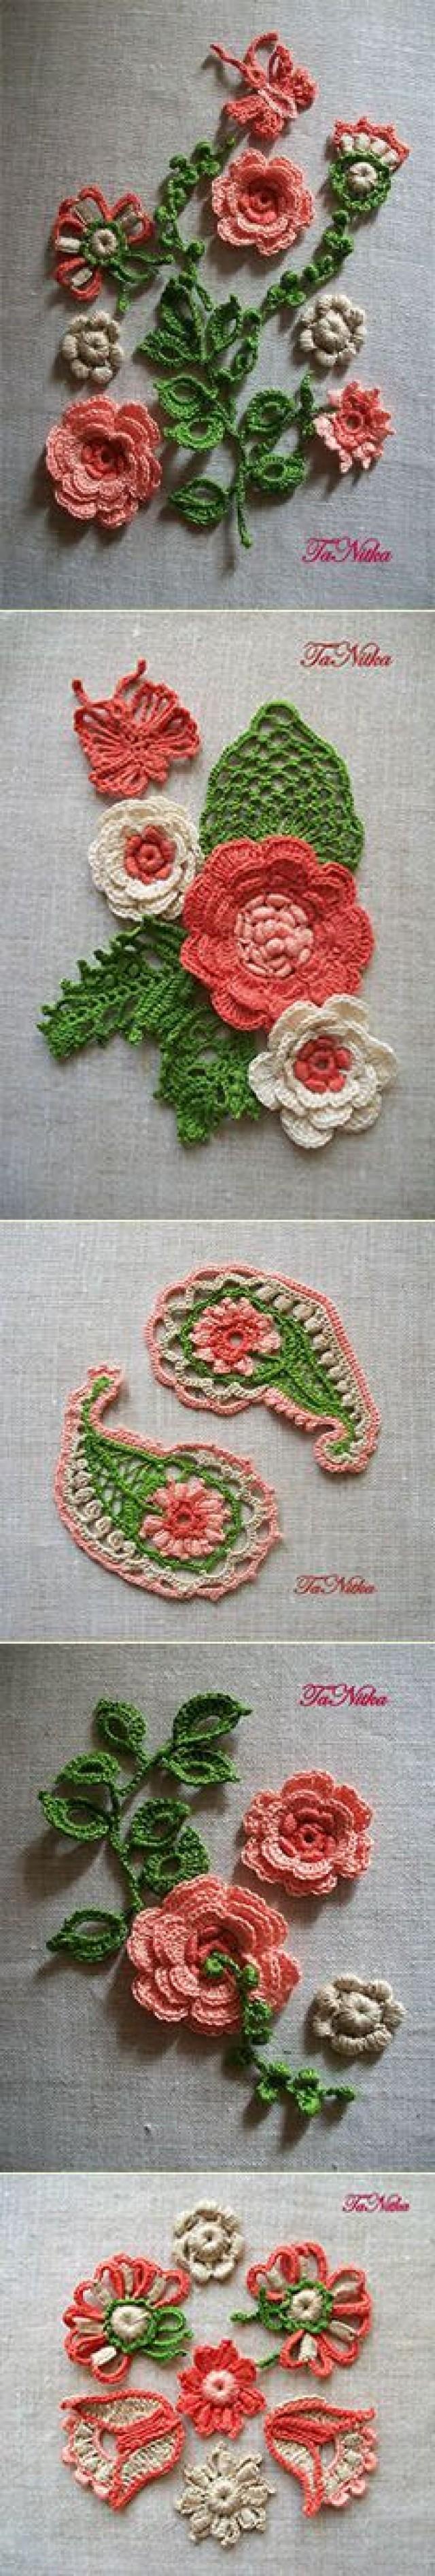 wedding photo - knitted flowers